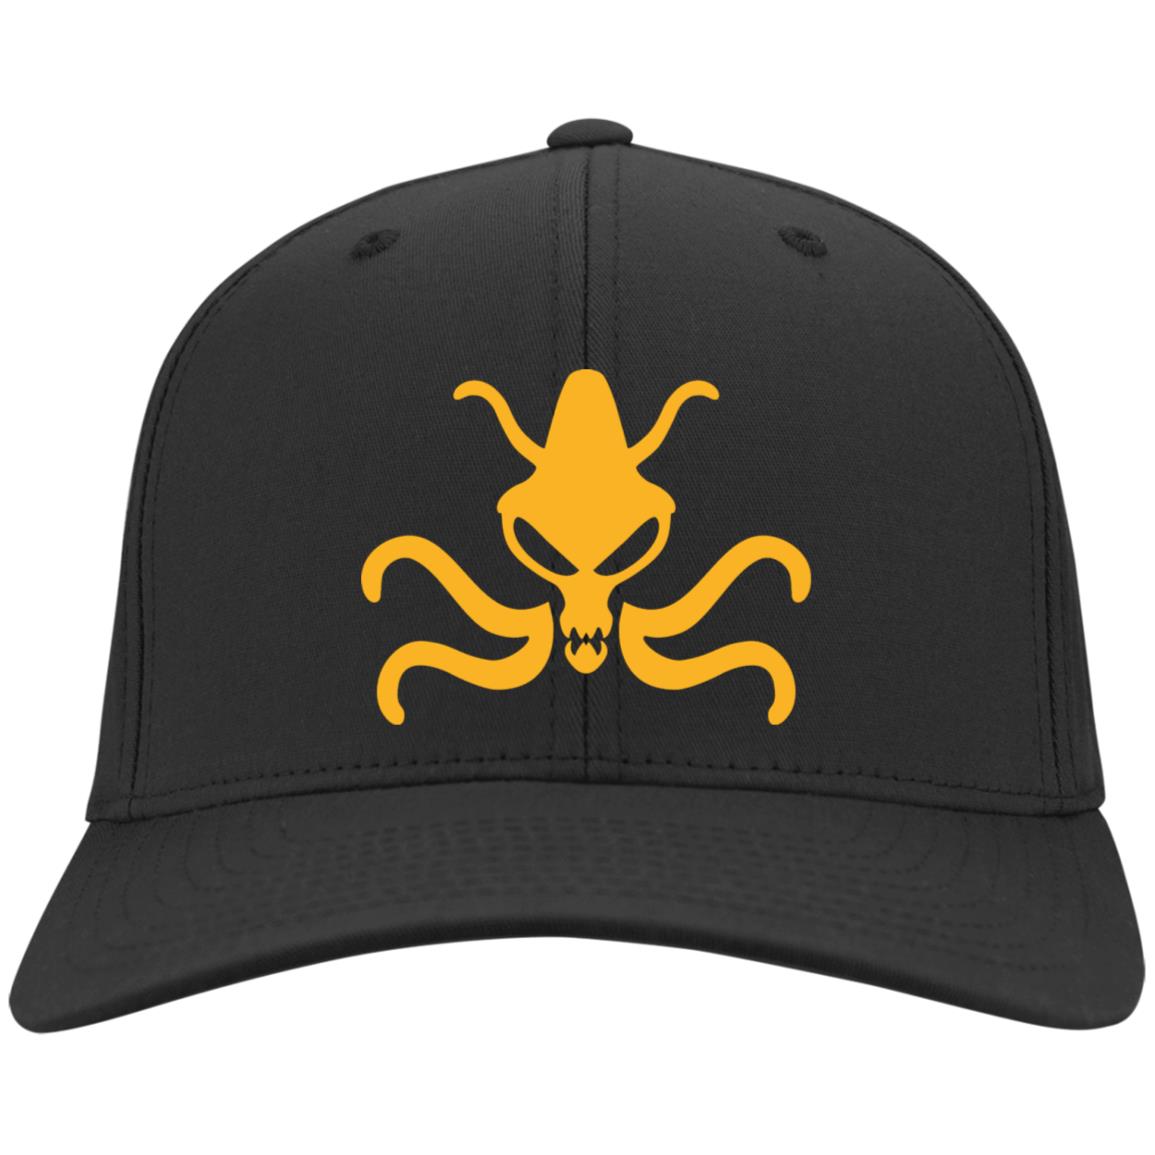 Weird Tales Squid Yellow Embroidered Twill Cap